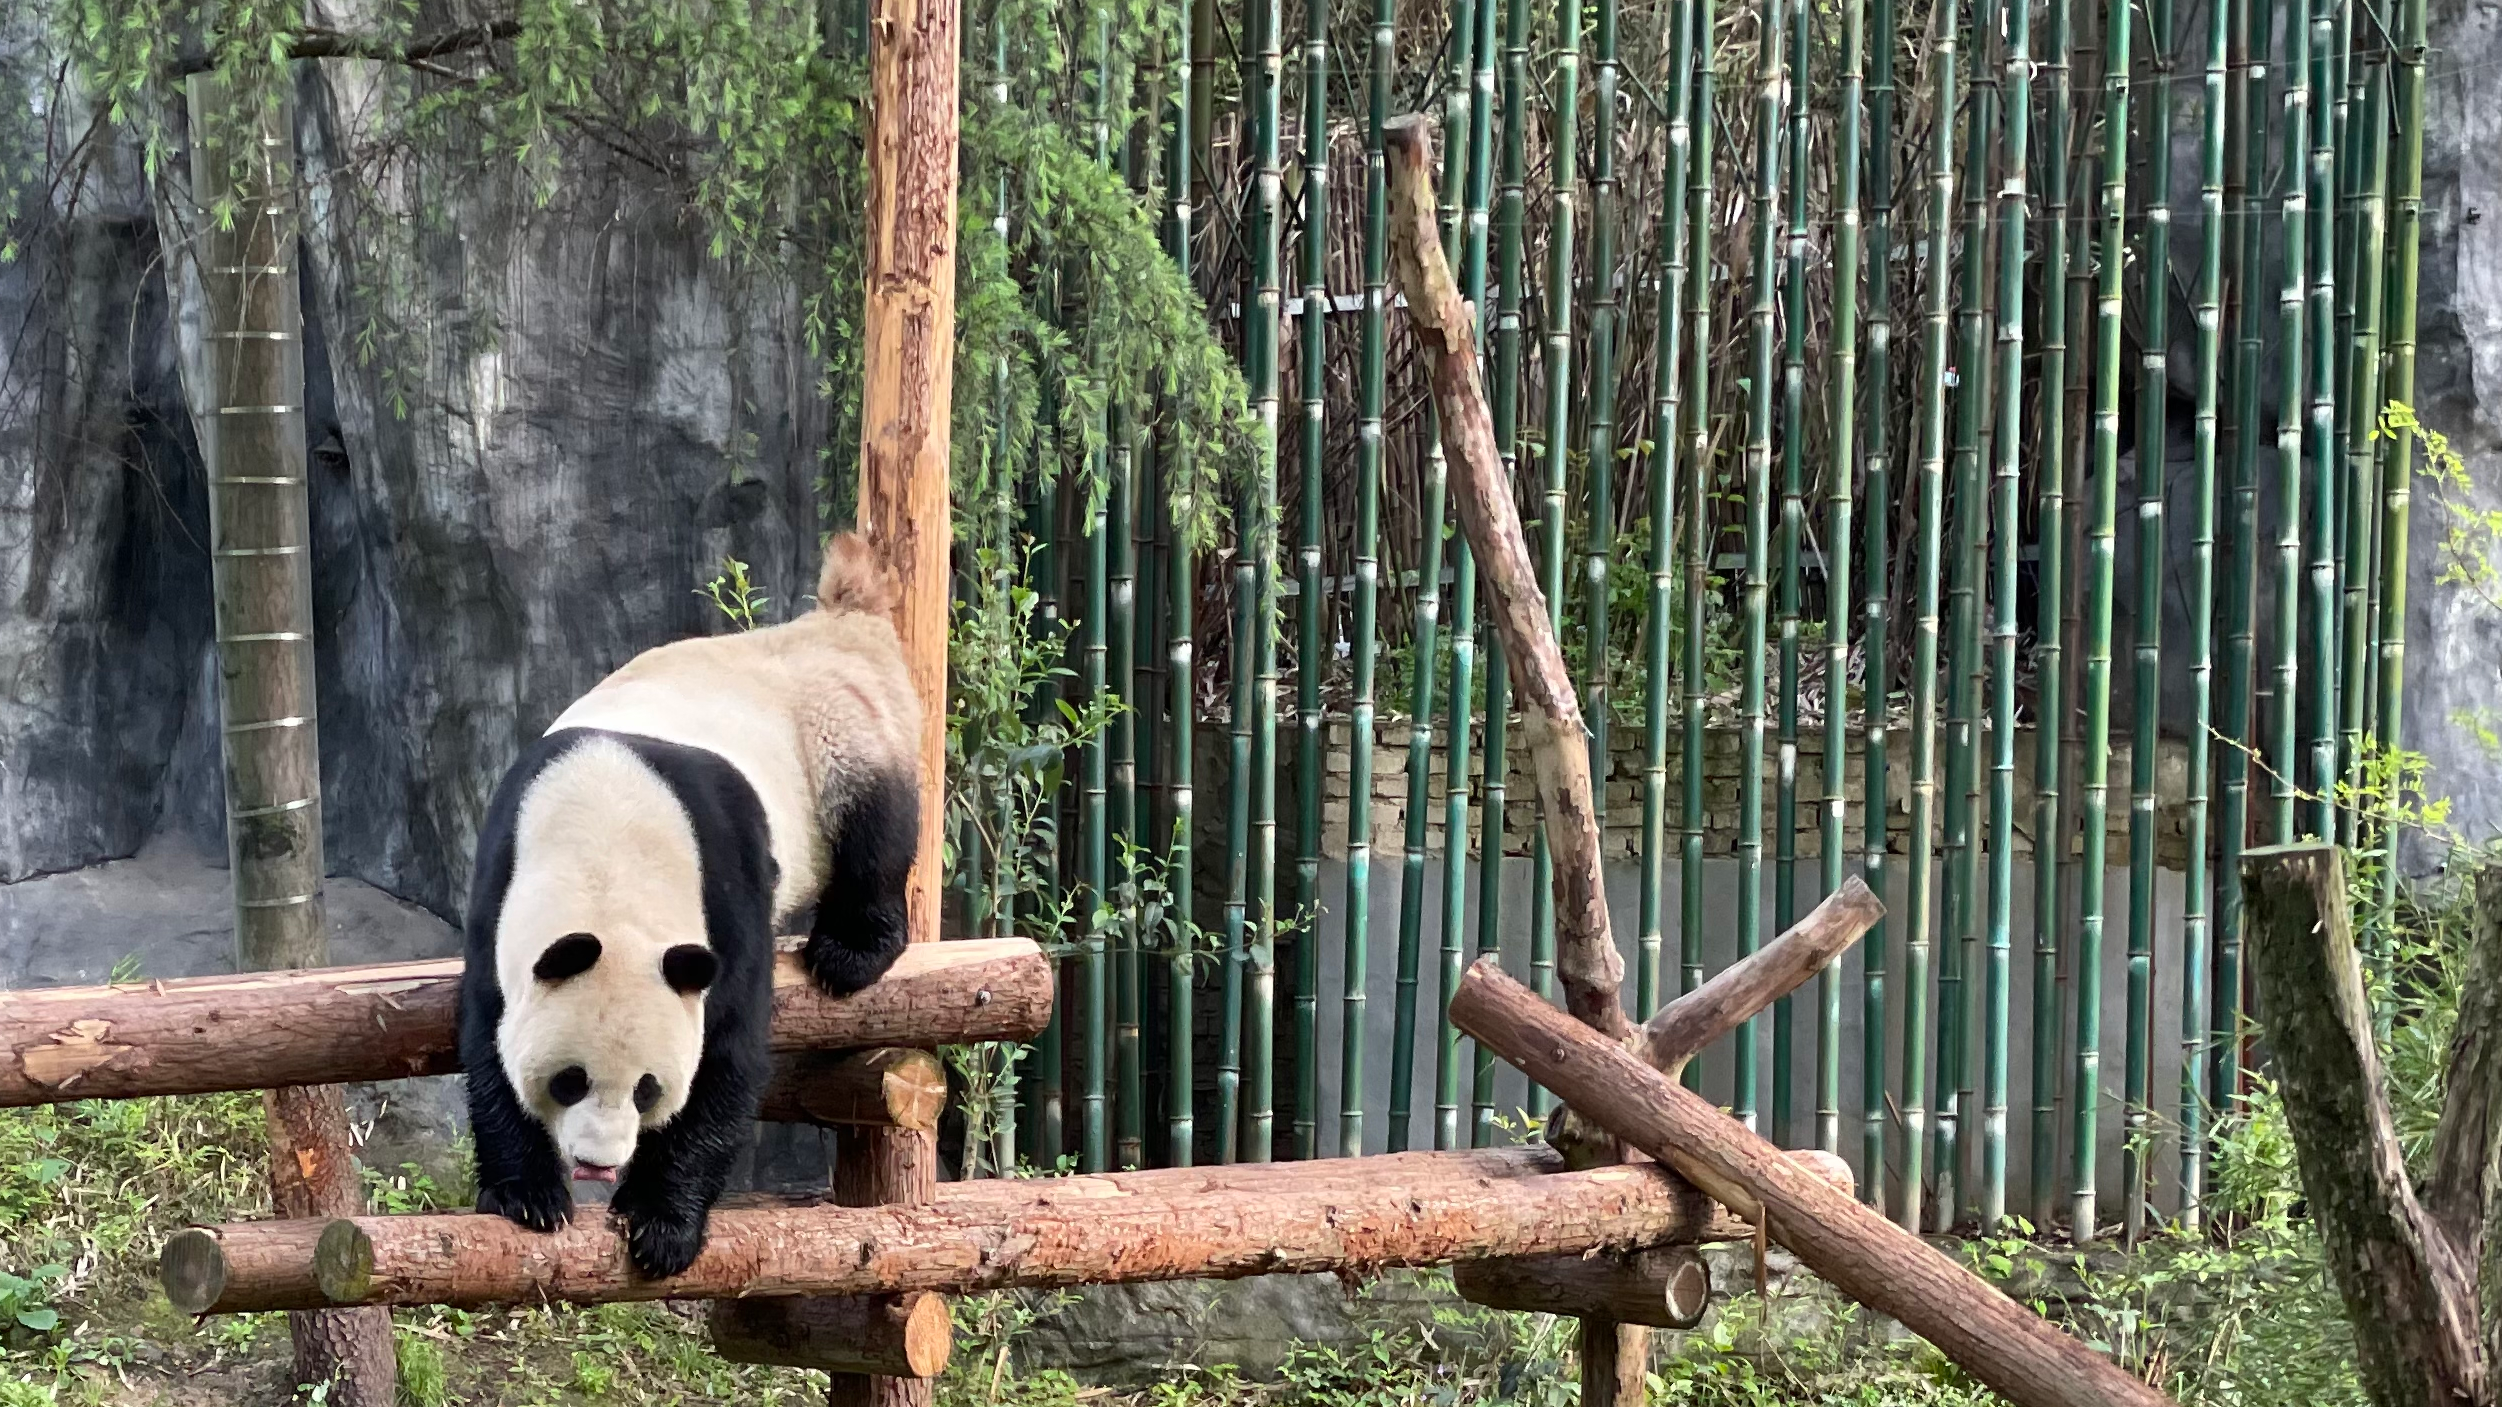 Live: A visit to the most animal friendly zoo in China - CGTN